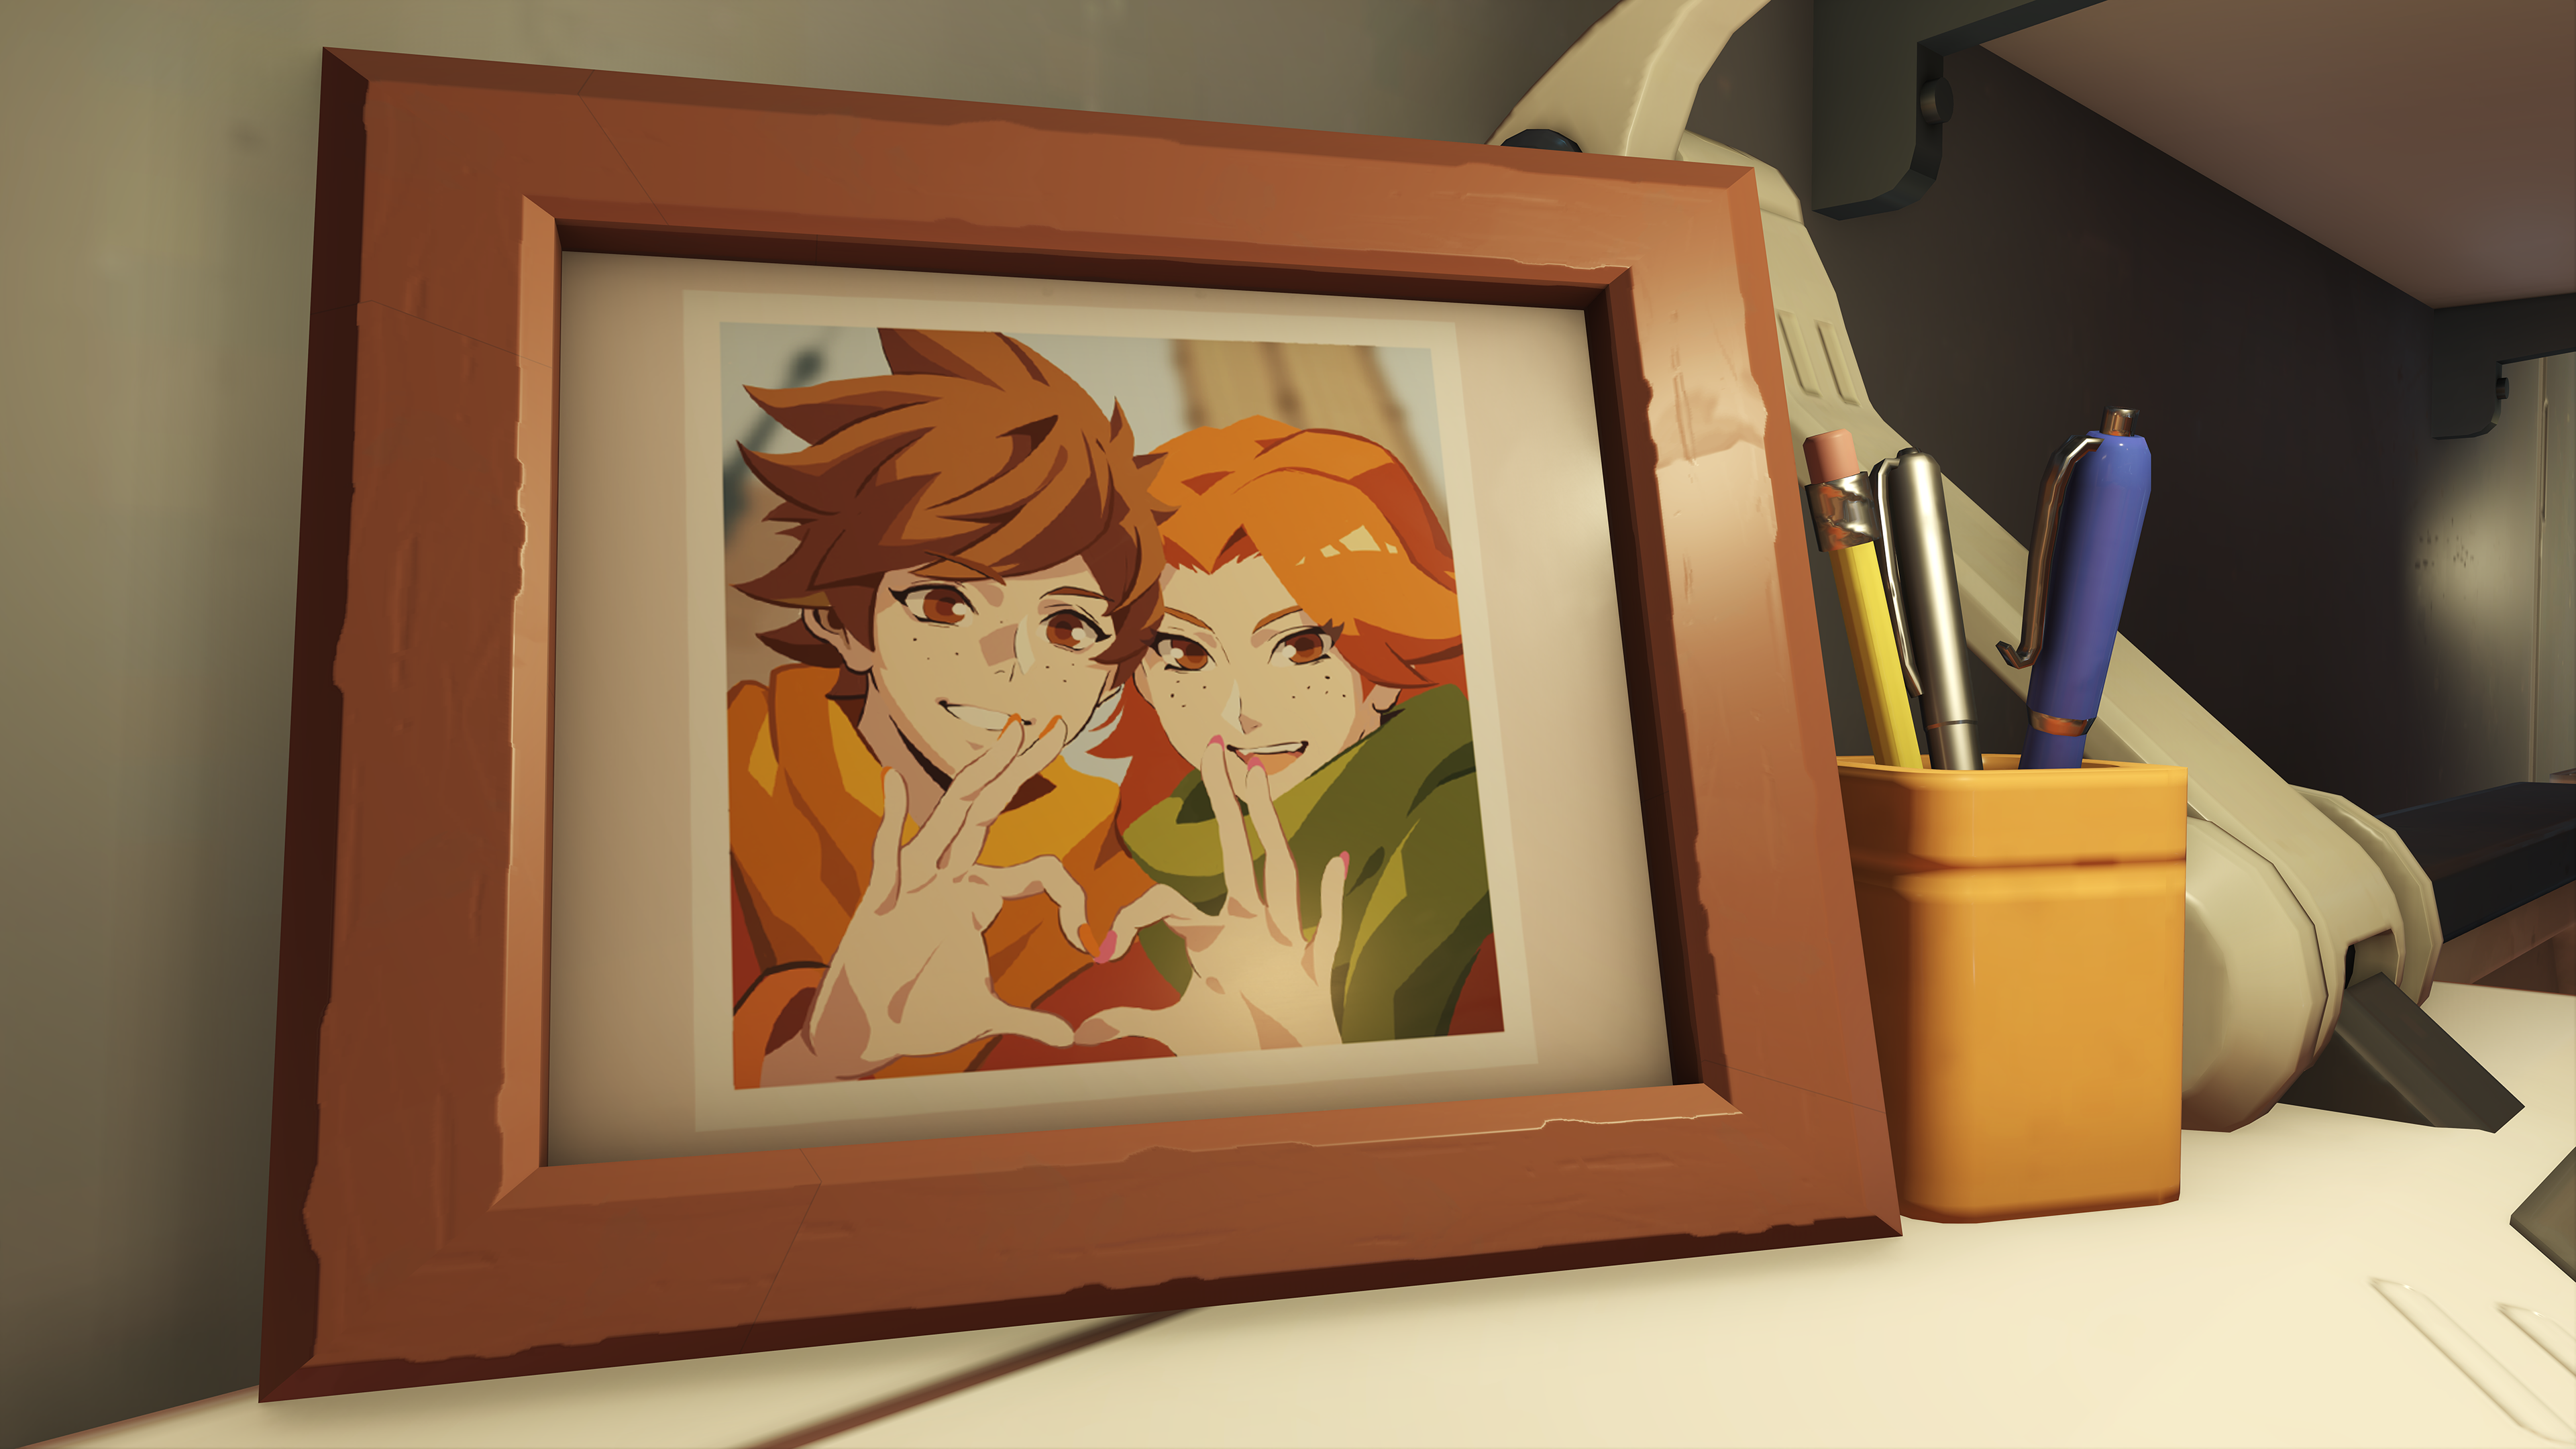 A photo of Tracer (Cara Theobold) and her girlfriend Emily appears in Watchpoint: Gibraltar as part of Pride Month celebrations in Overwatch 2 (2022), Blizzard Entertainment